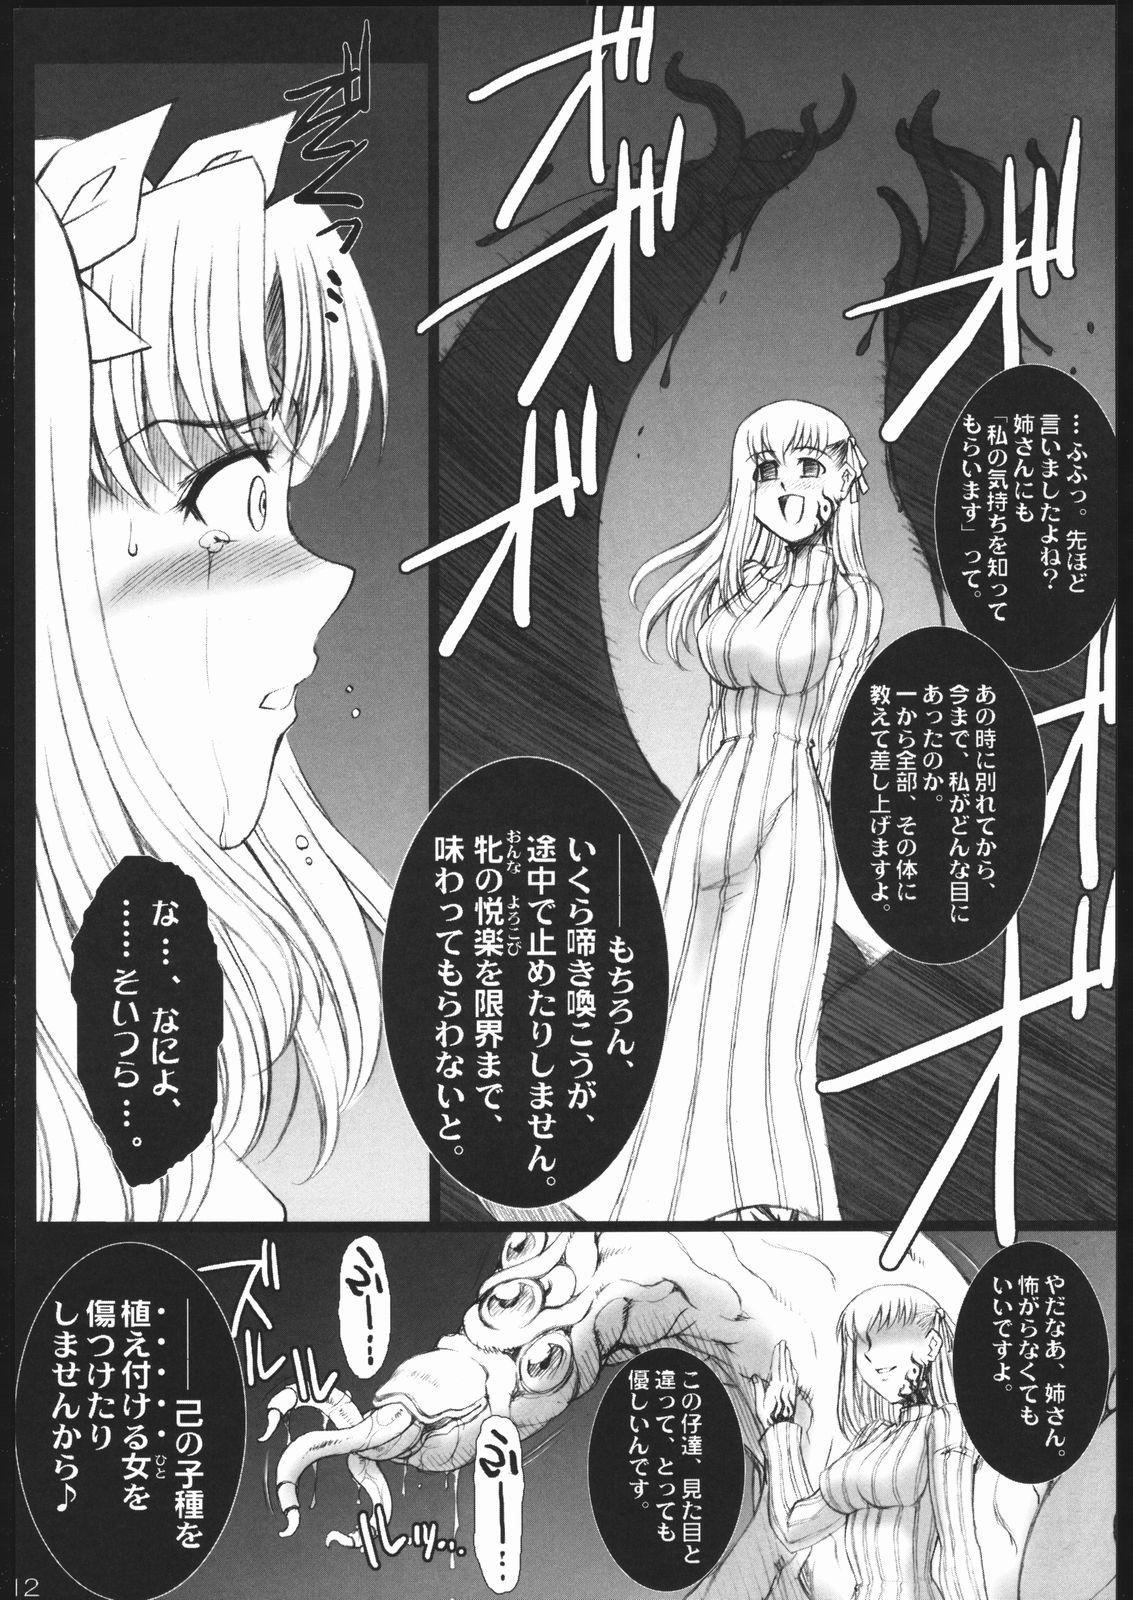 Dotado Red Degeneration - Fate stay night Ano - Page 11